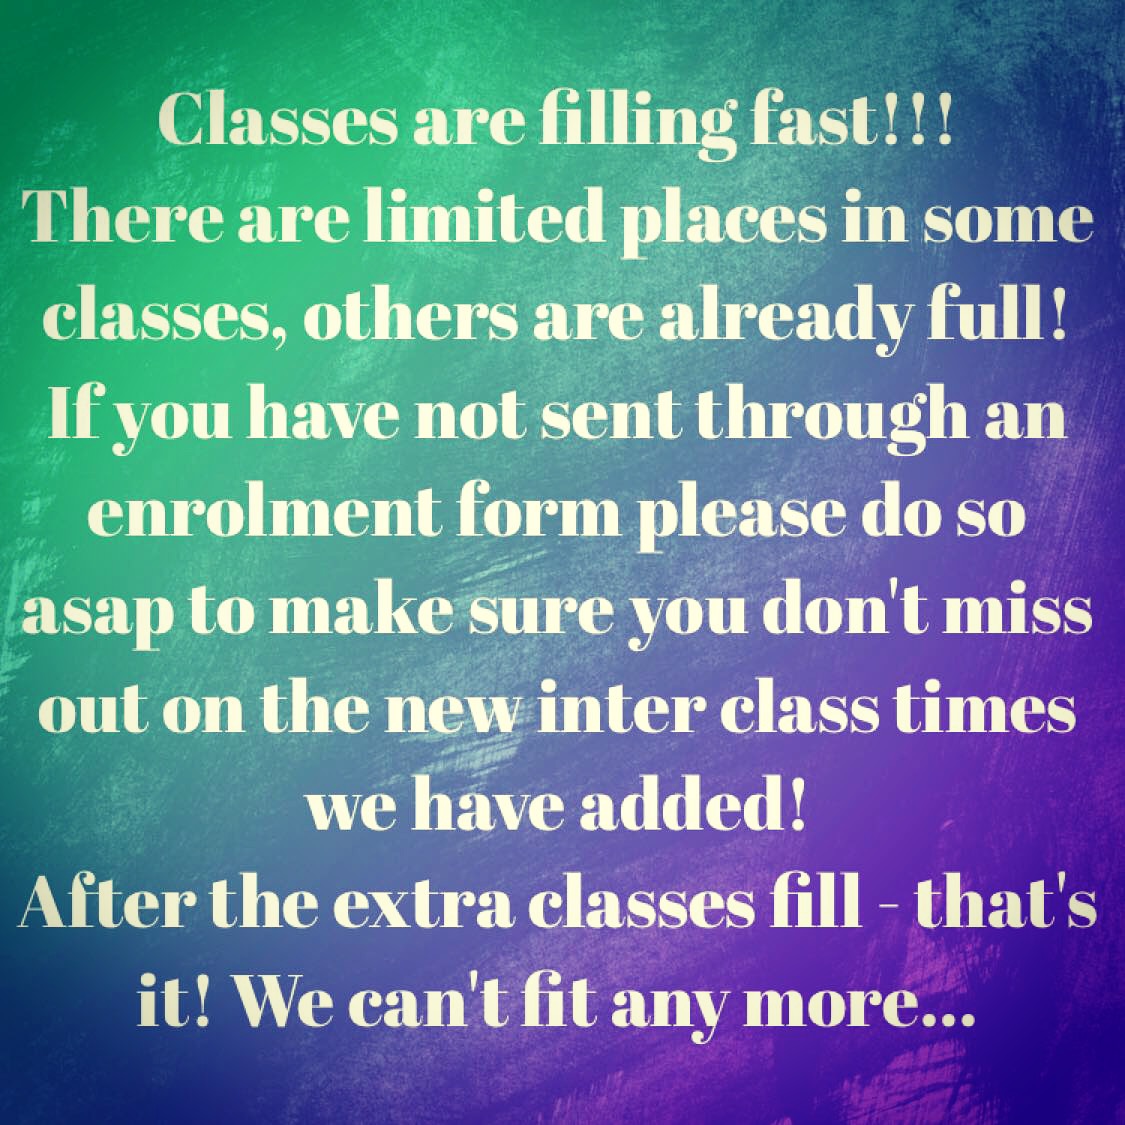 Classes are filling FAST!